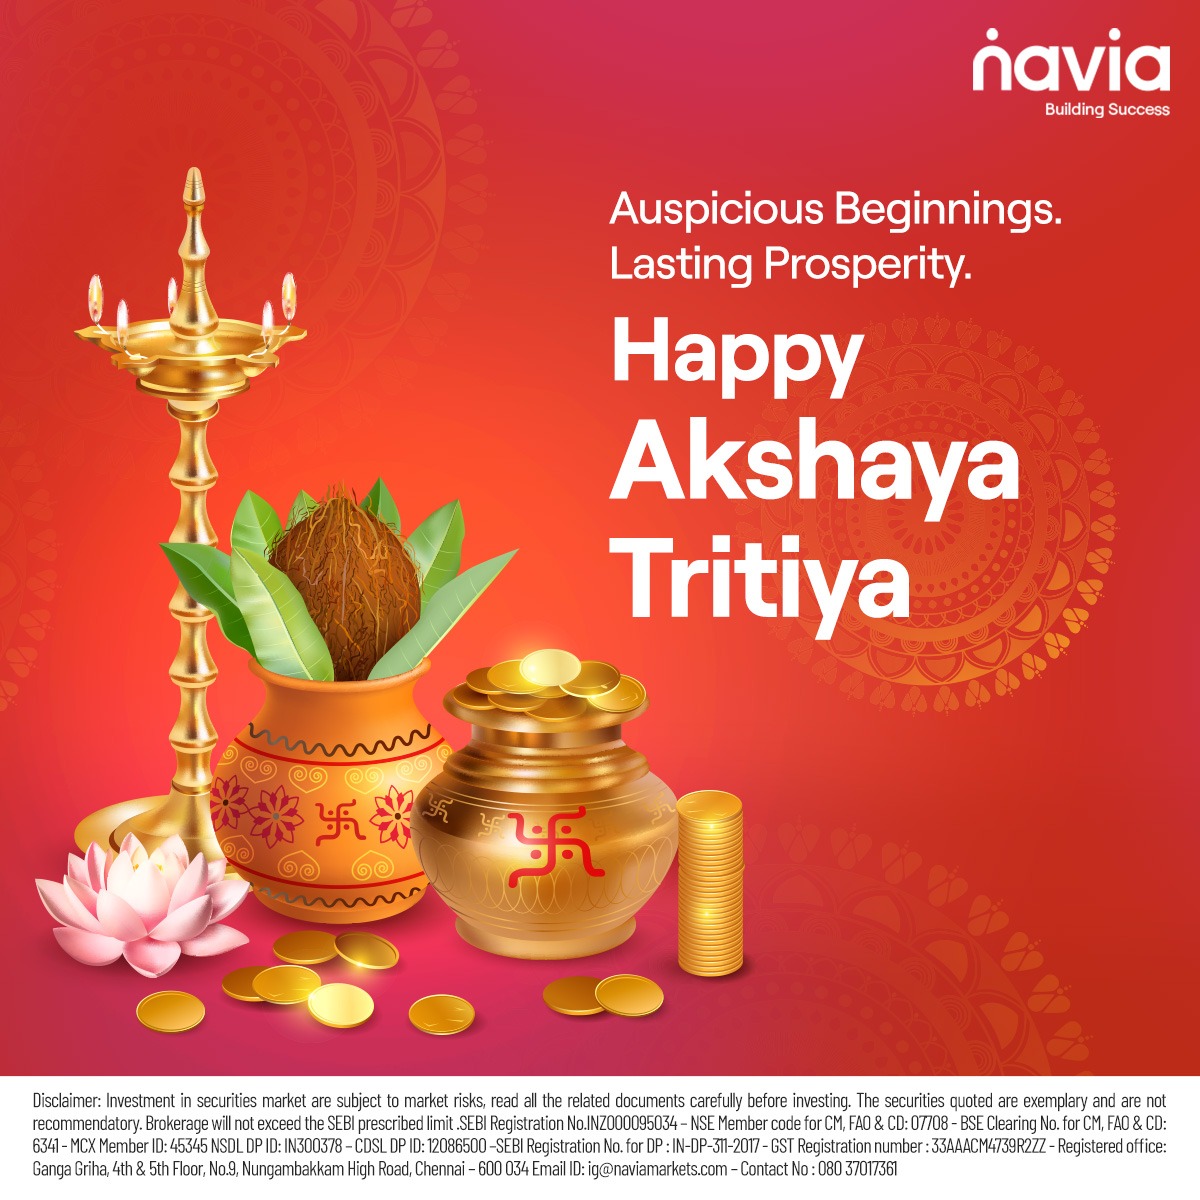 Start your investment journey on the auspicious day of Akshaya Tritiya! Together, let's unlock your financial potential and cultivate a future filled with abundance. Happy Akshaya Tritiya!

#Navia #TrustedTradingPartner #TradeSmart #FinancialFreedom #InvestingJourney #StockMarket…